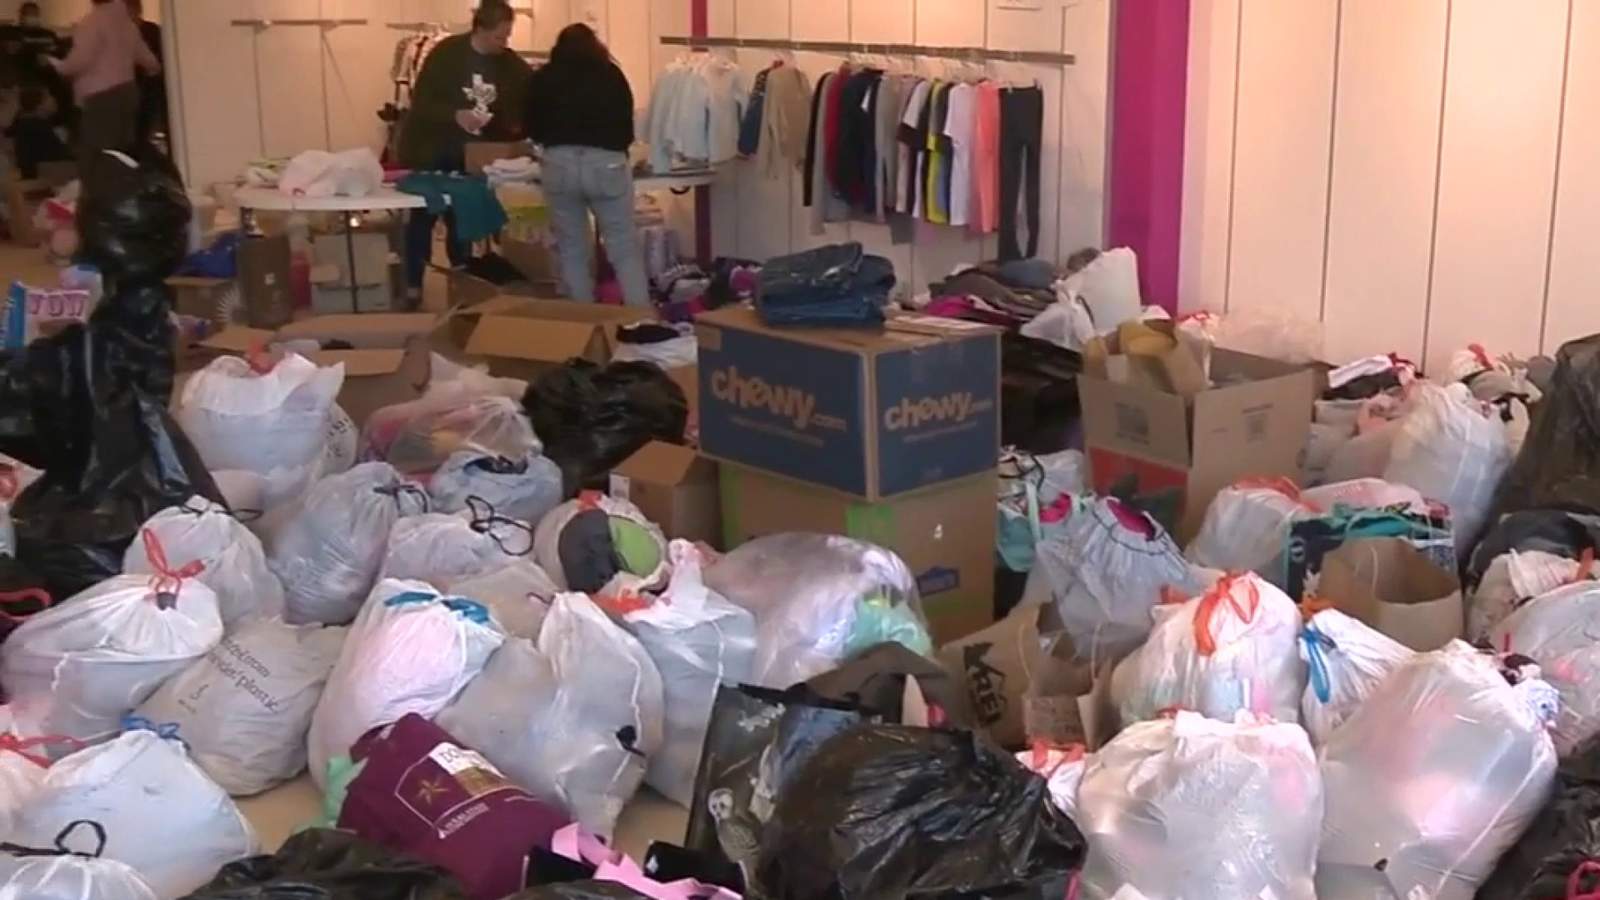 Community responds to Stone Oak fire by donating thousands of items to victims